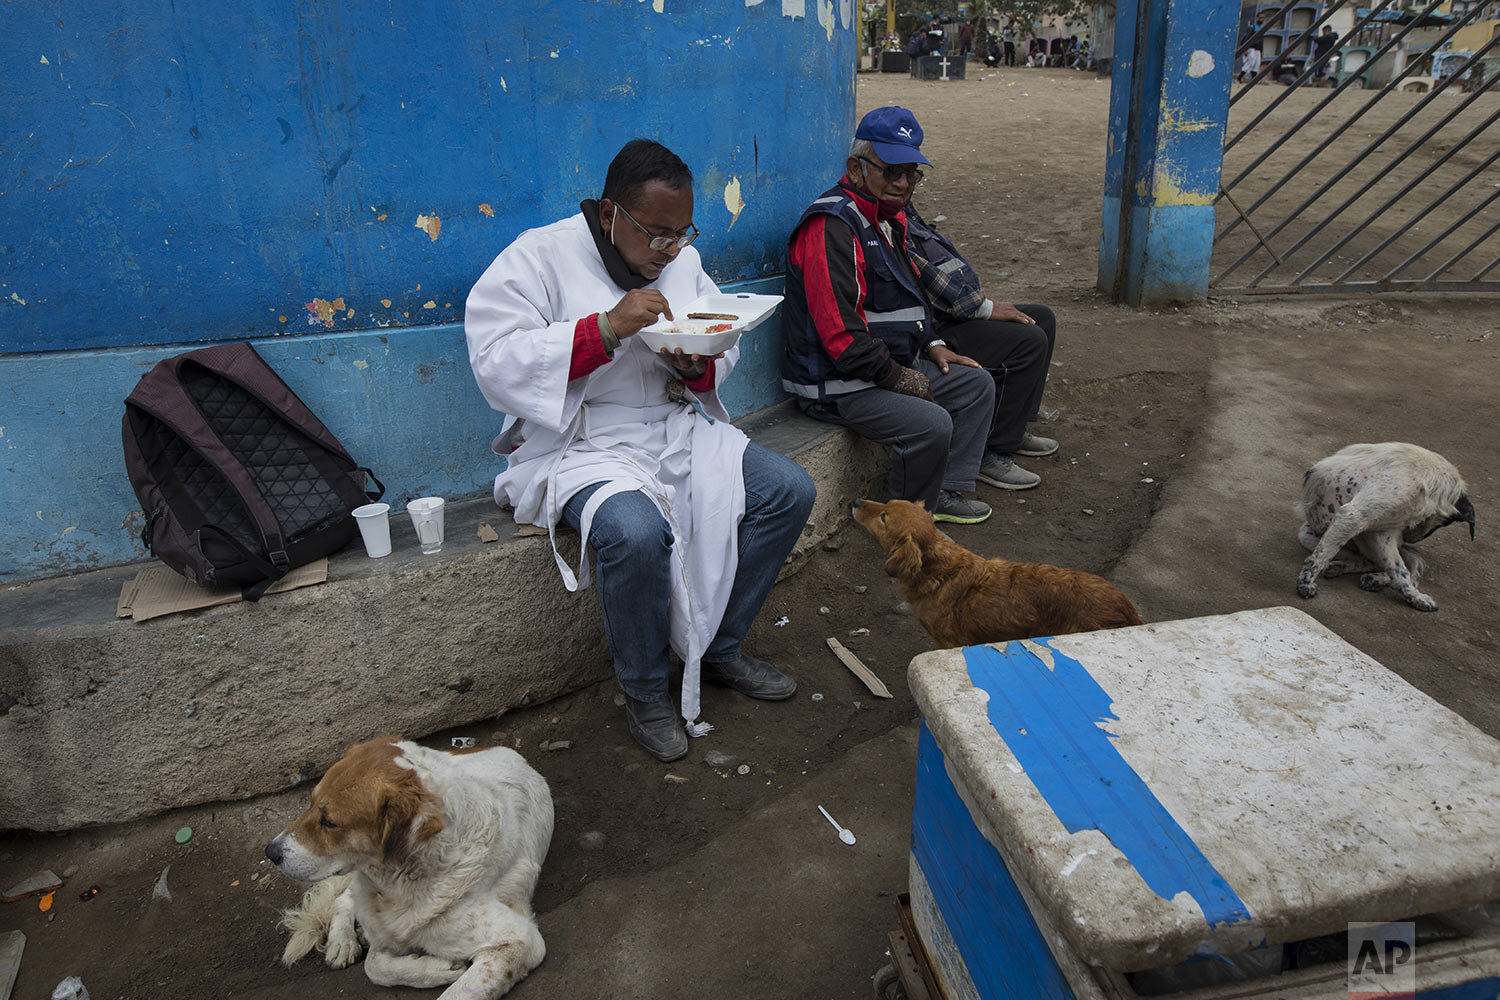  Brother Ronald Marin enjoys a free lunch between burials, at the entrance of the “Martires 19 de Julio” cemetery in Comas, on the outskirts of Lima, Peru, Friday, July 17, 2020. (AP Photo/Rodrigo Abd) 